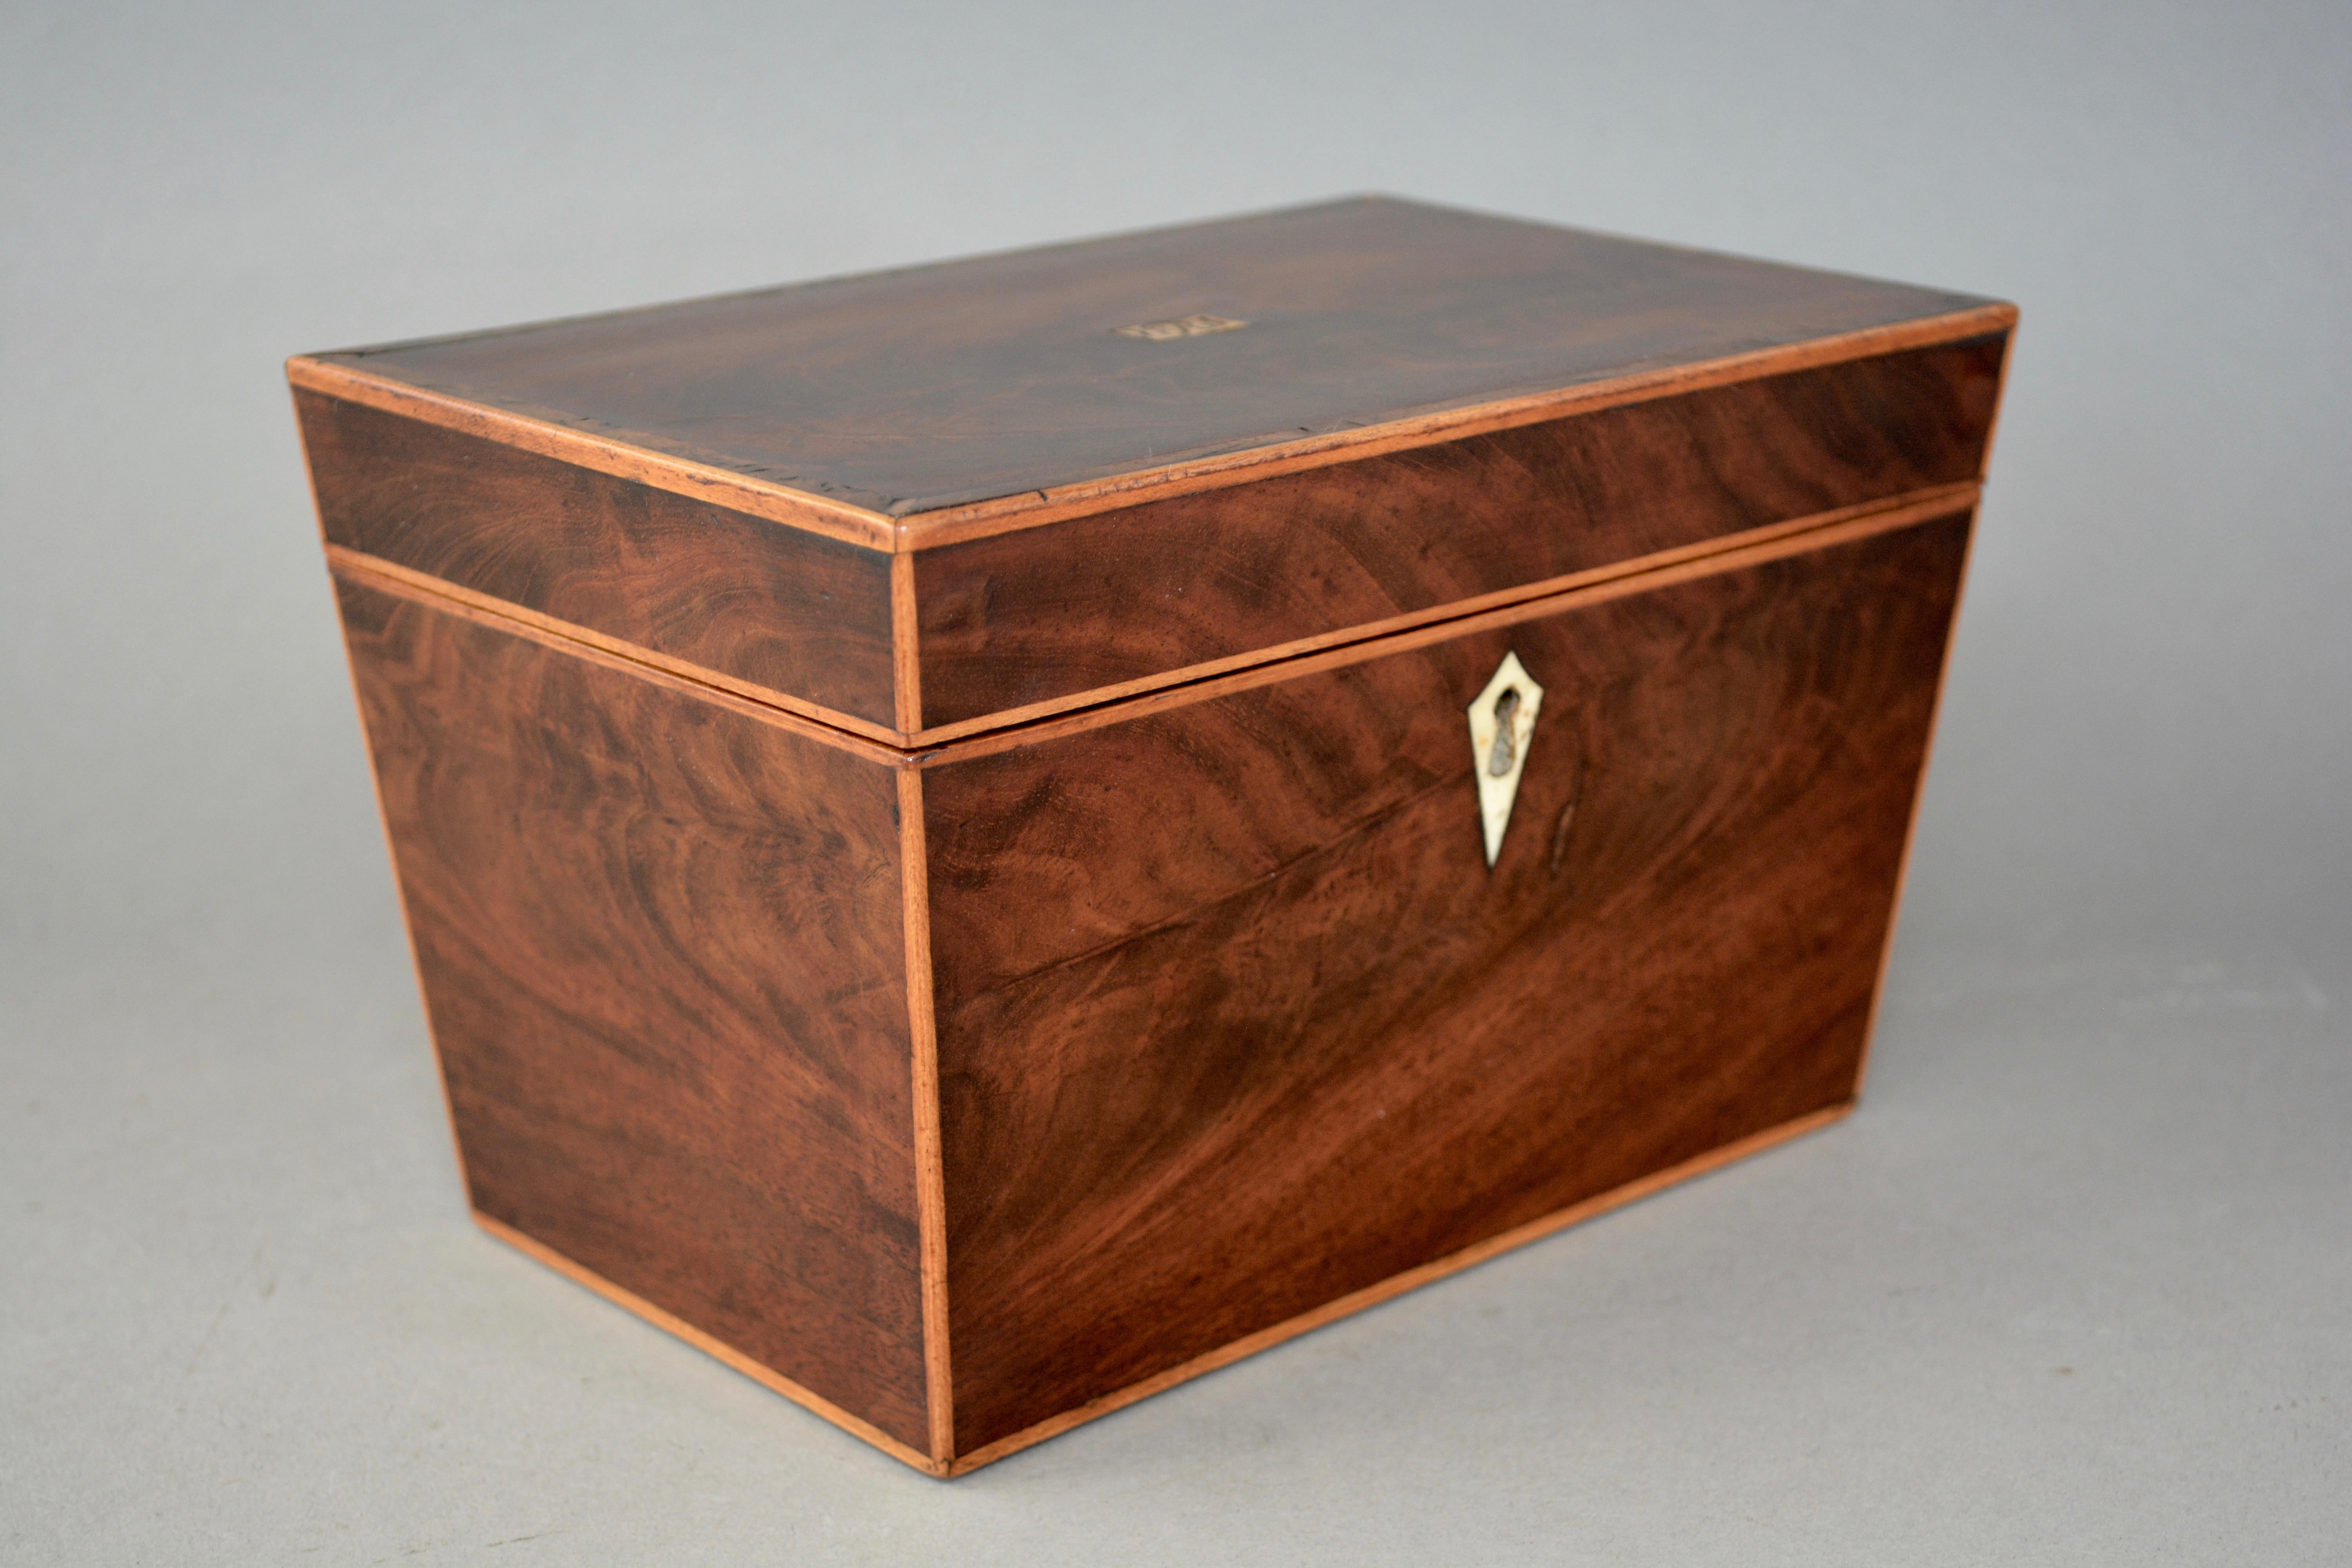 A charming and unusual George III canted side tea caddy. Hand made from flamed mahogany with yew wood cross banded top and boxwood strung edges. The box retains the original bone escutcheon and cartouche. English and dating from circa 1810.